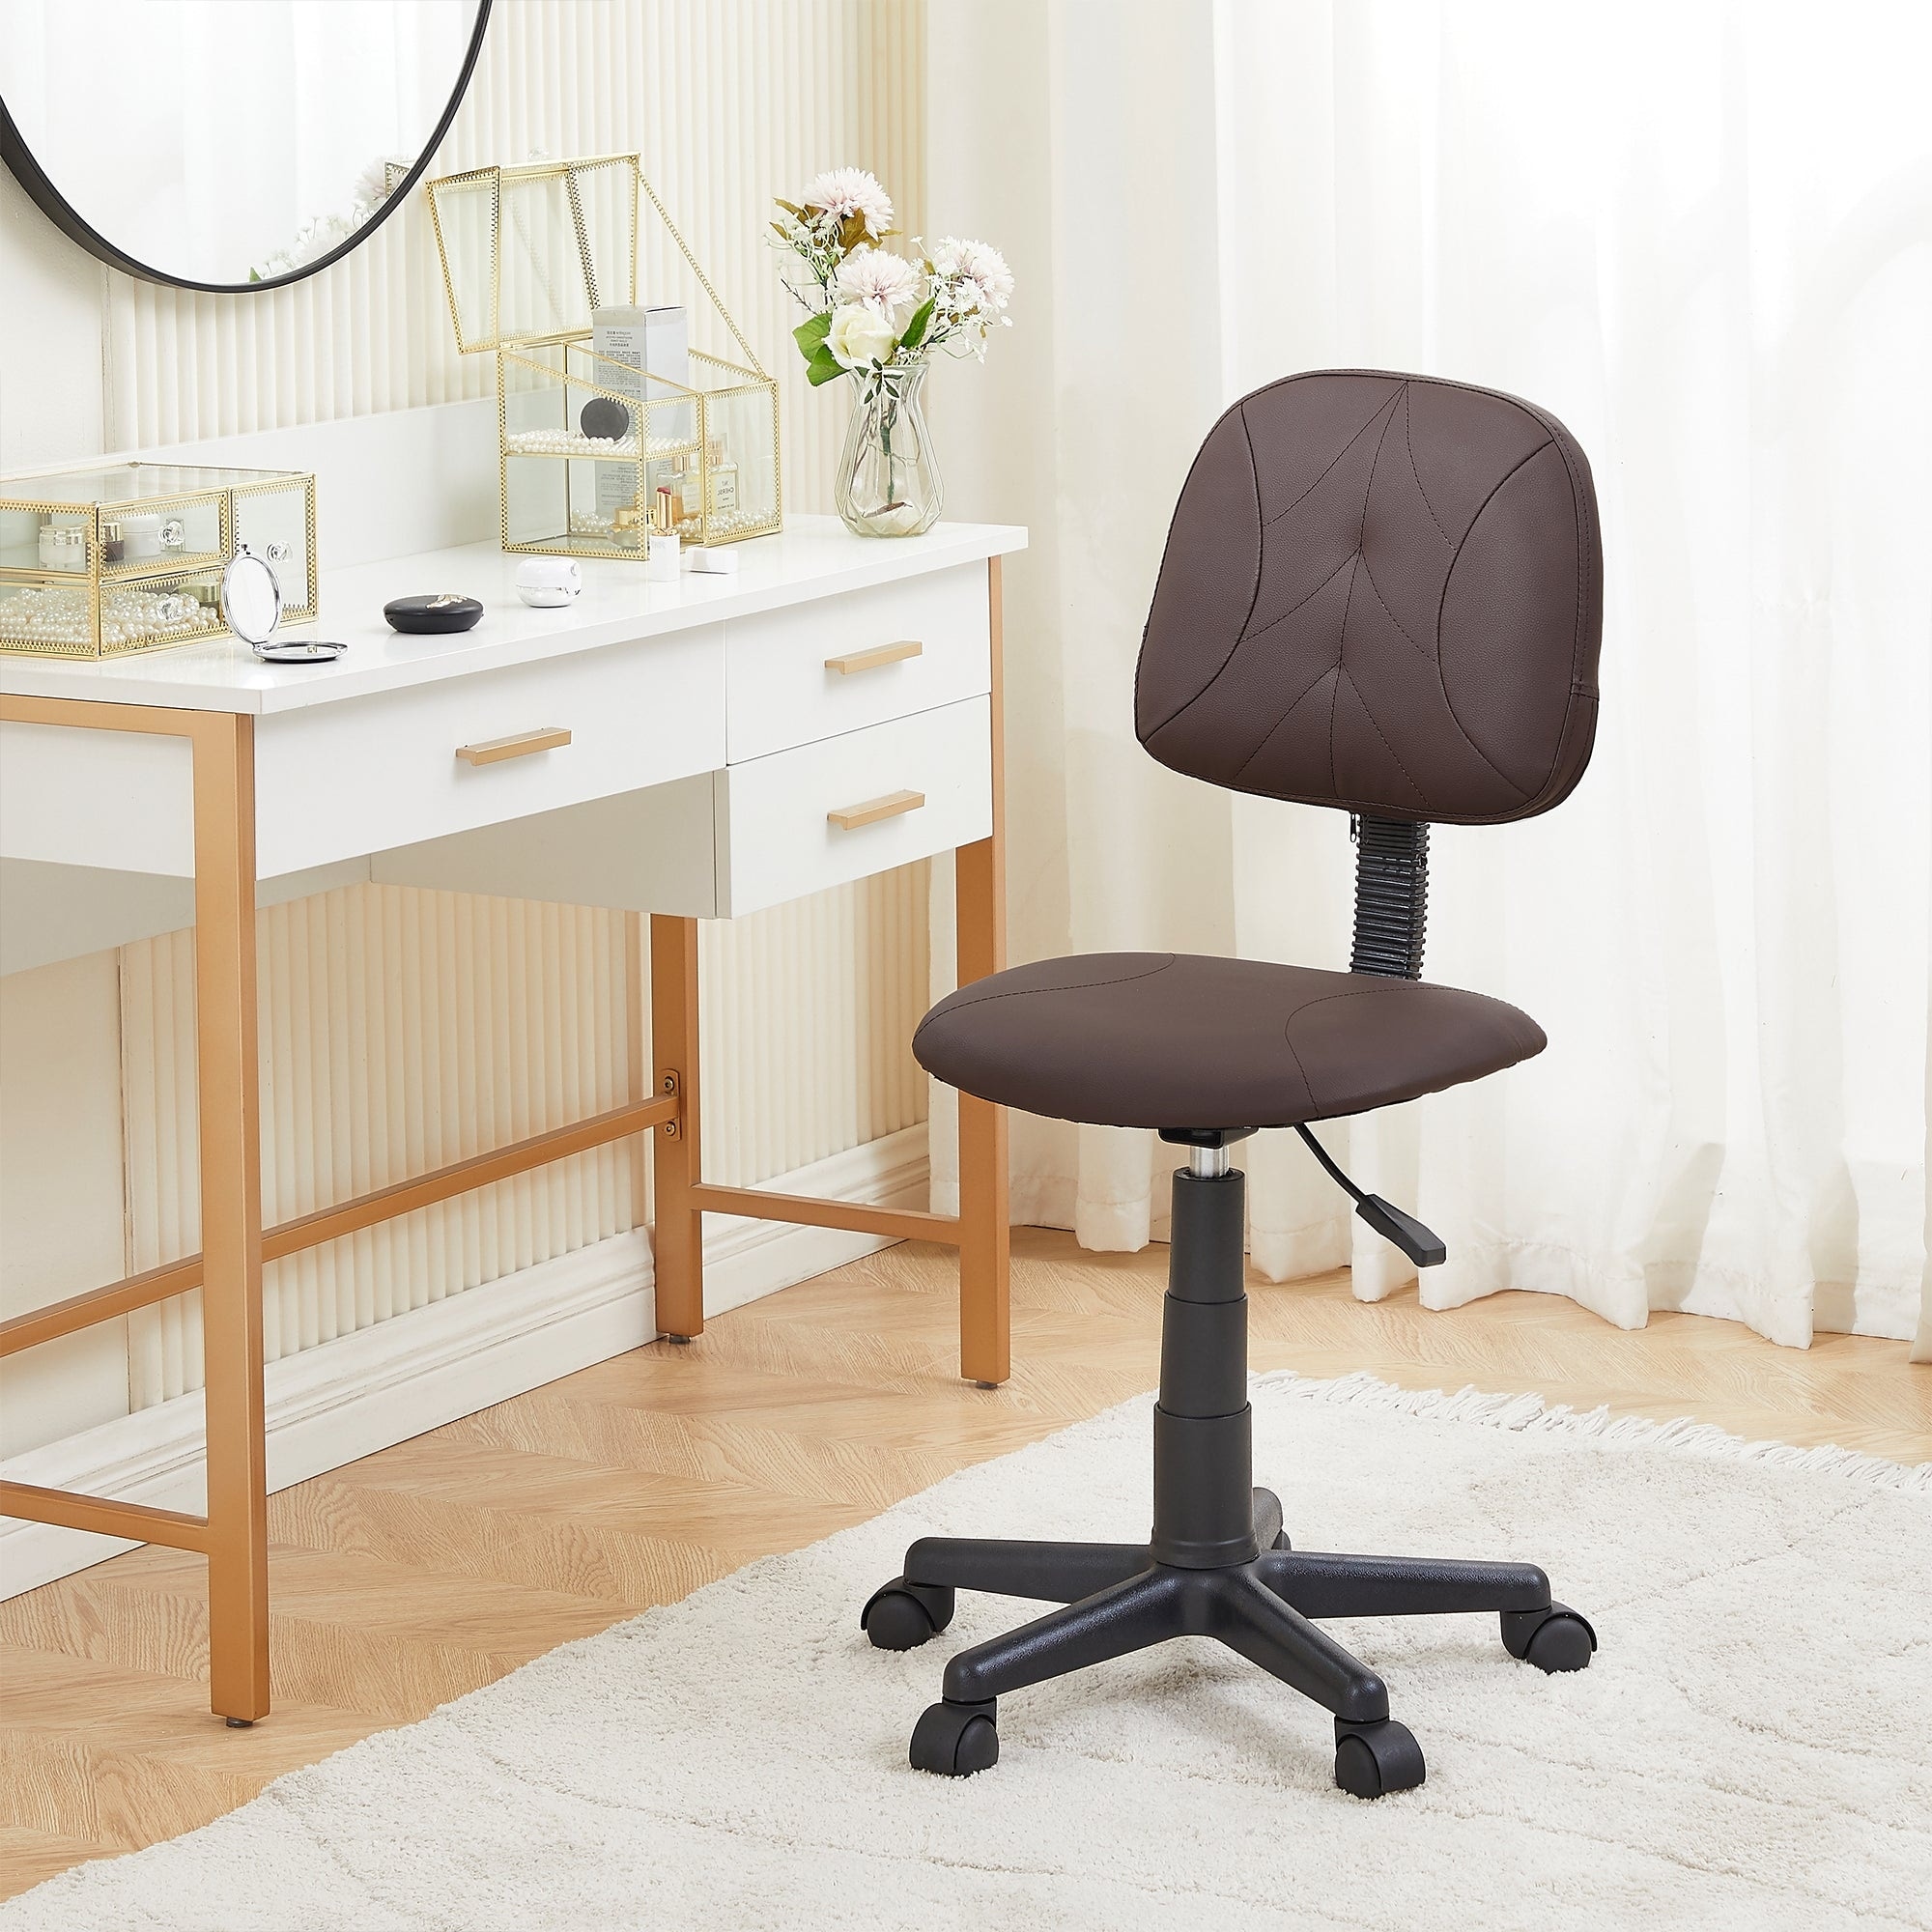 https://ak1.ostkcdn.com/images/products/is/images/direct/216c06506a1a79febfd48e1c398651390b6598aa/VECELO-Simple-Design-Chair%2C-Morden-Adjustable-Height-Office-Chair-Desk-Chair-without-Arm.jpg